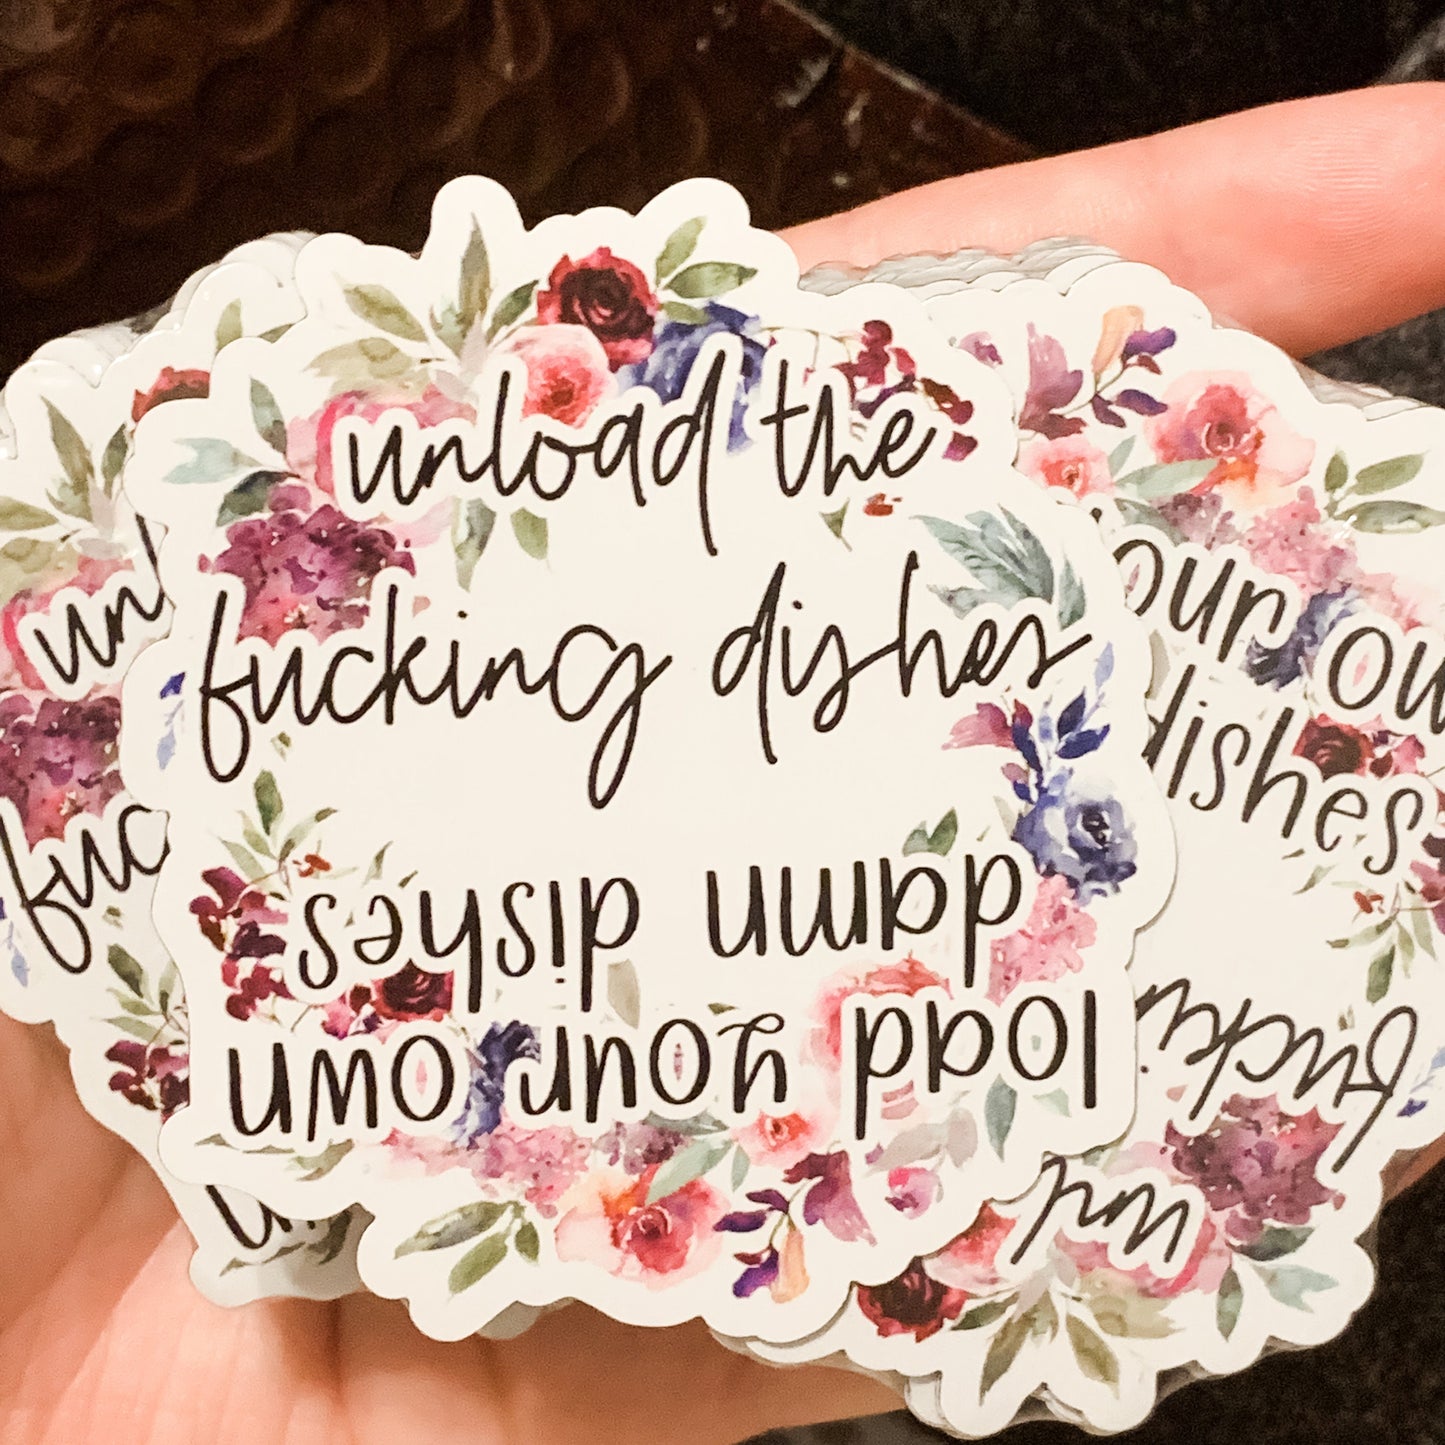 Load Your Own Damn Dishes / Unload the Fucking Dishes Dishwasher Magnet 